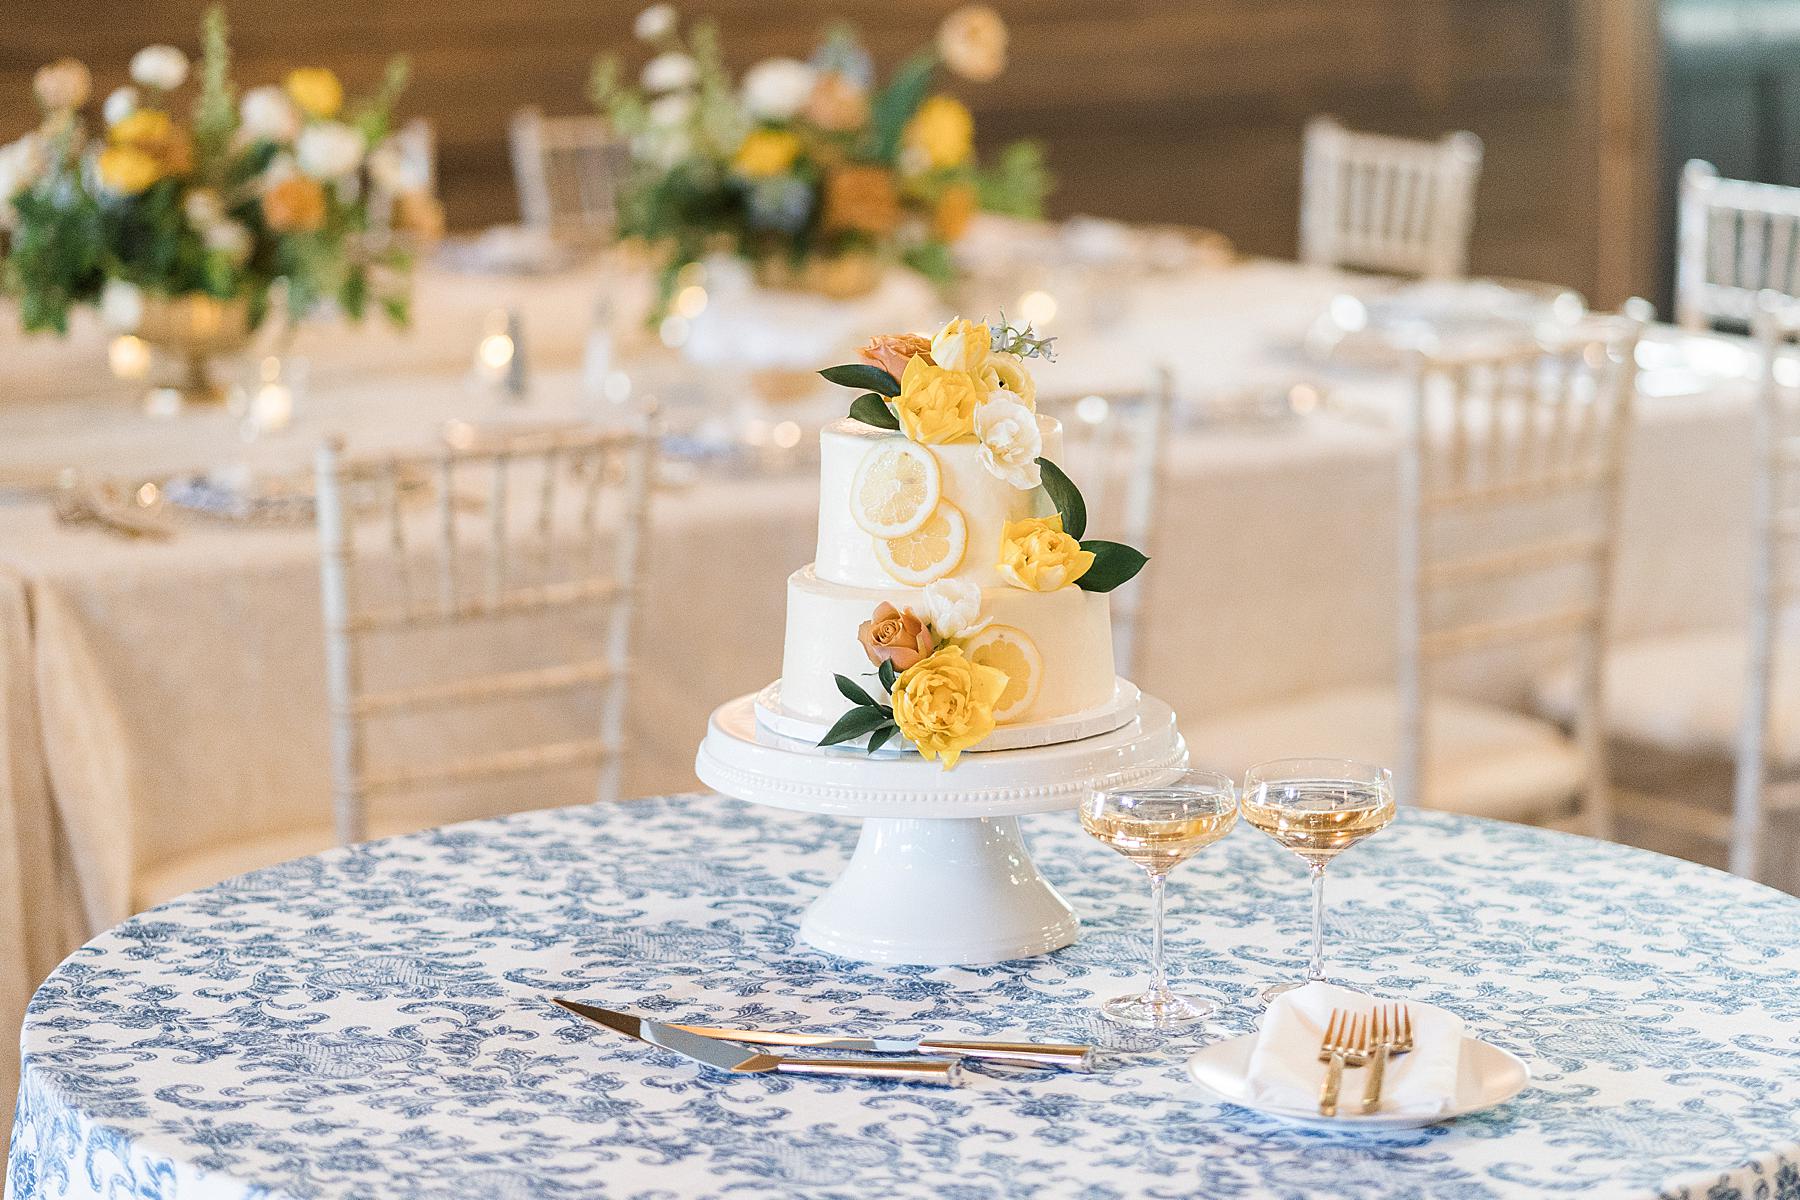 wedding cake at refined upscale barn wedding reception decor with yellow, orange, and blue florals near madison, wisconsin